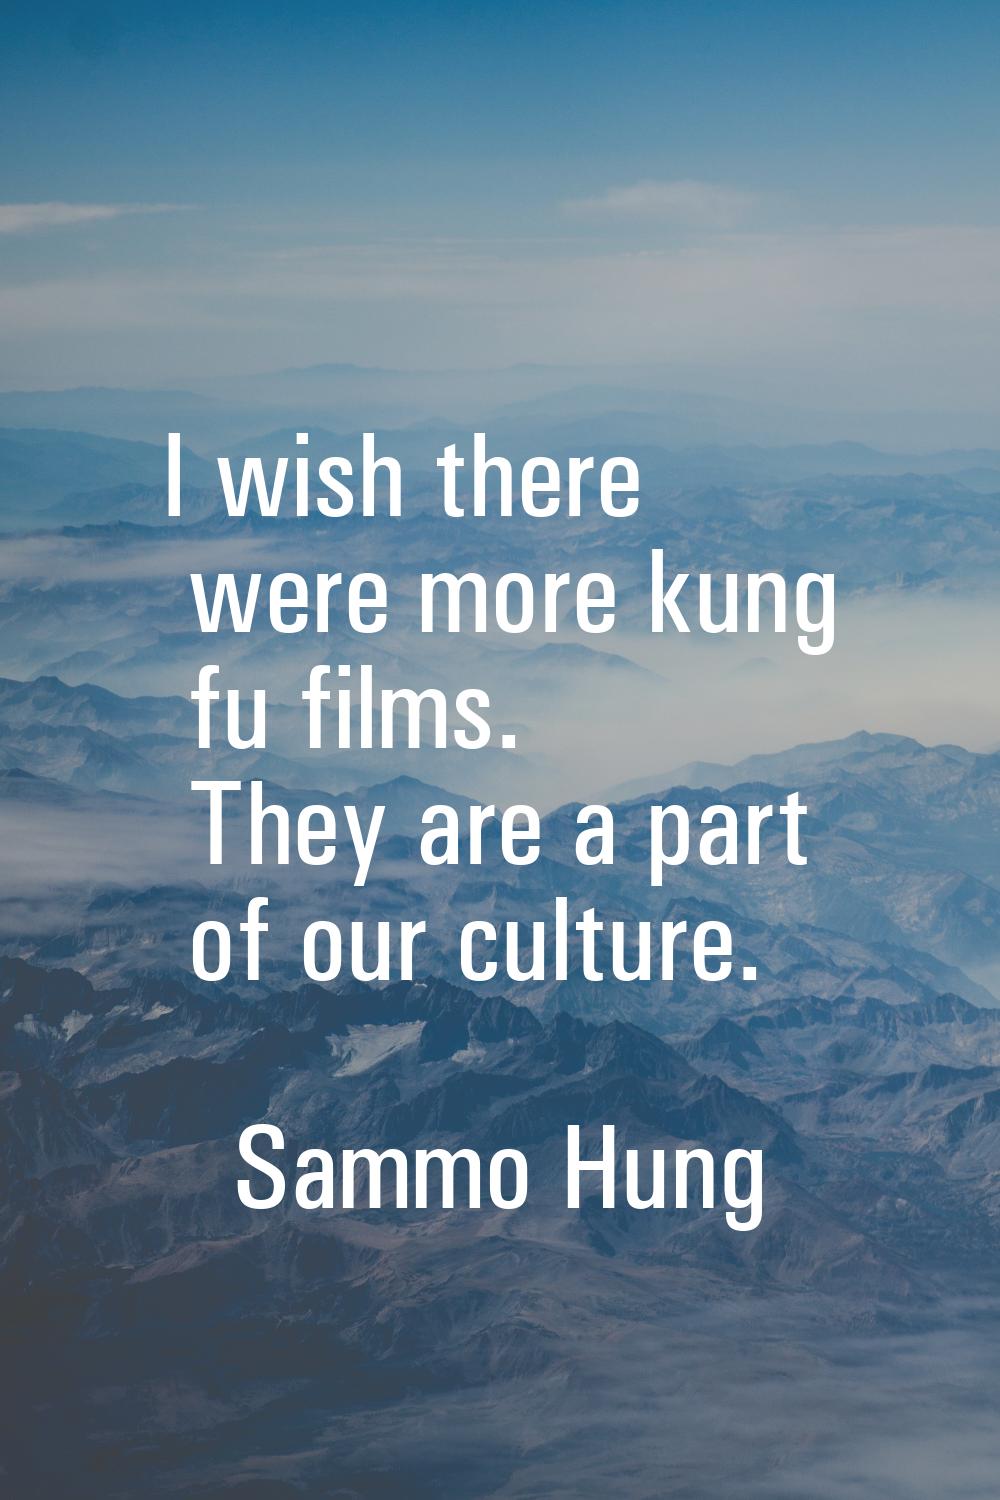 I wish there were more kung fu films. They are a part of our culture.